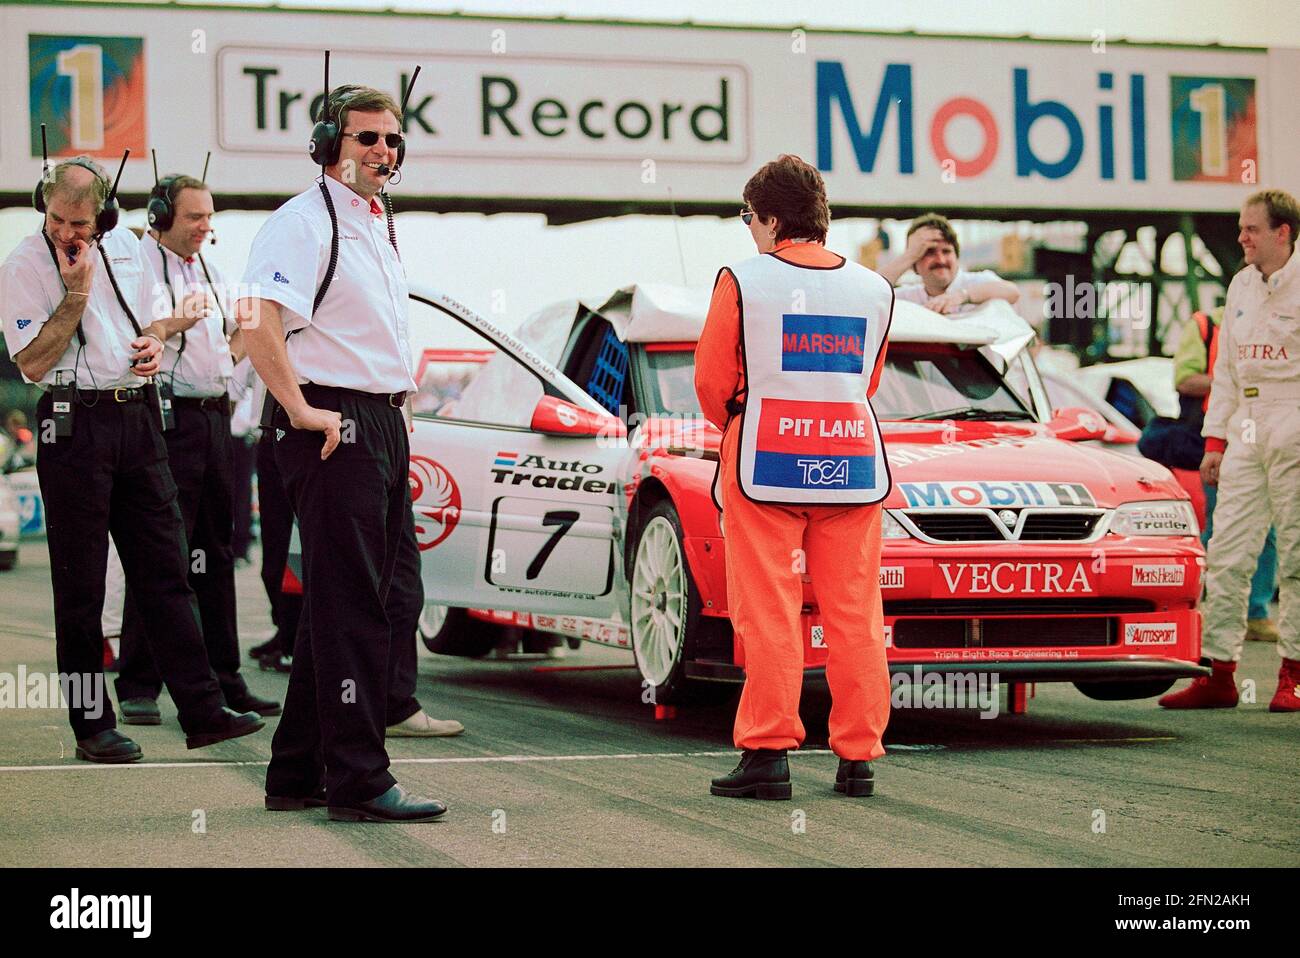 Derek Warwick overseeing Vauxhall Motorsport challenge of the British Touring Car championship of 1999 pictured on the grid at Thruxton Circuit as the cars and drivers prepare for the start of the race. Stock Photo